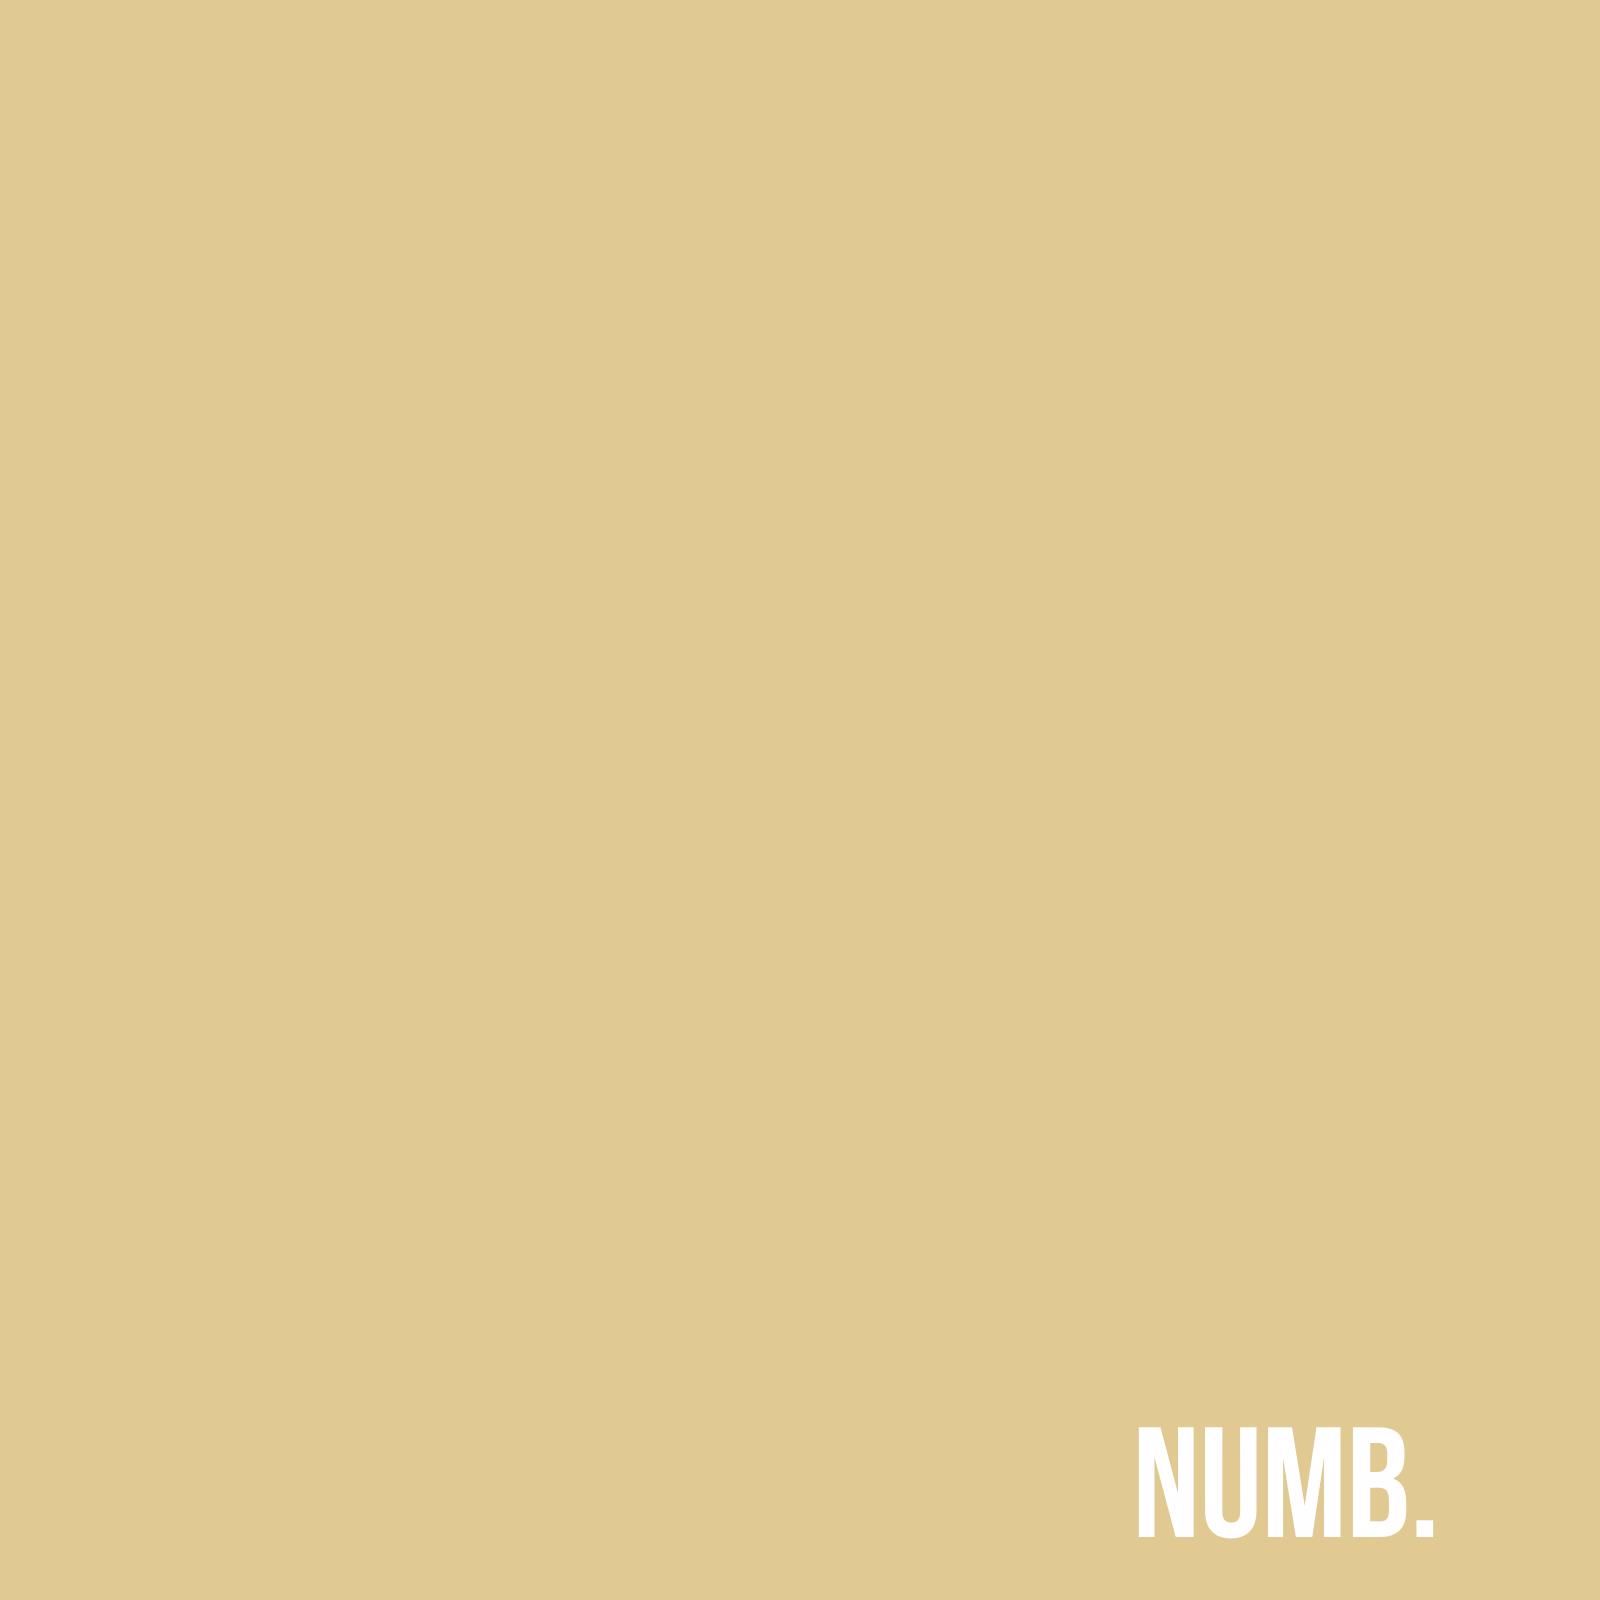 Sii mai numb [prod. by aftertheparty]